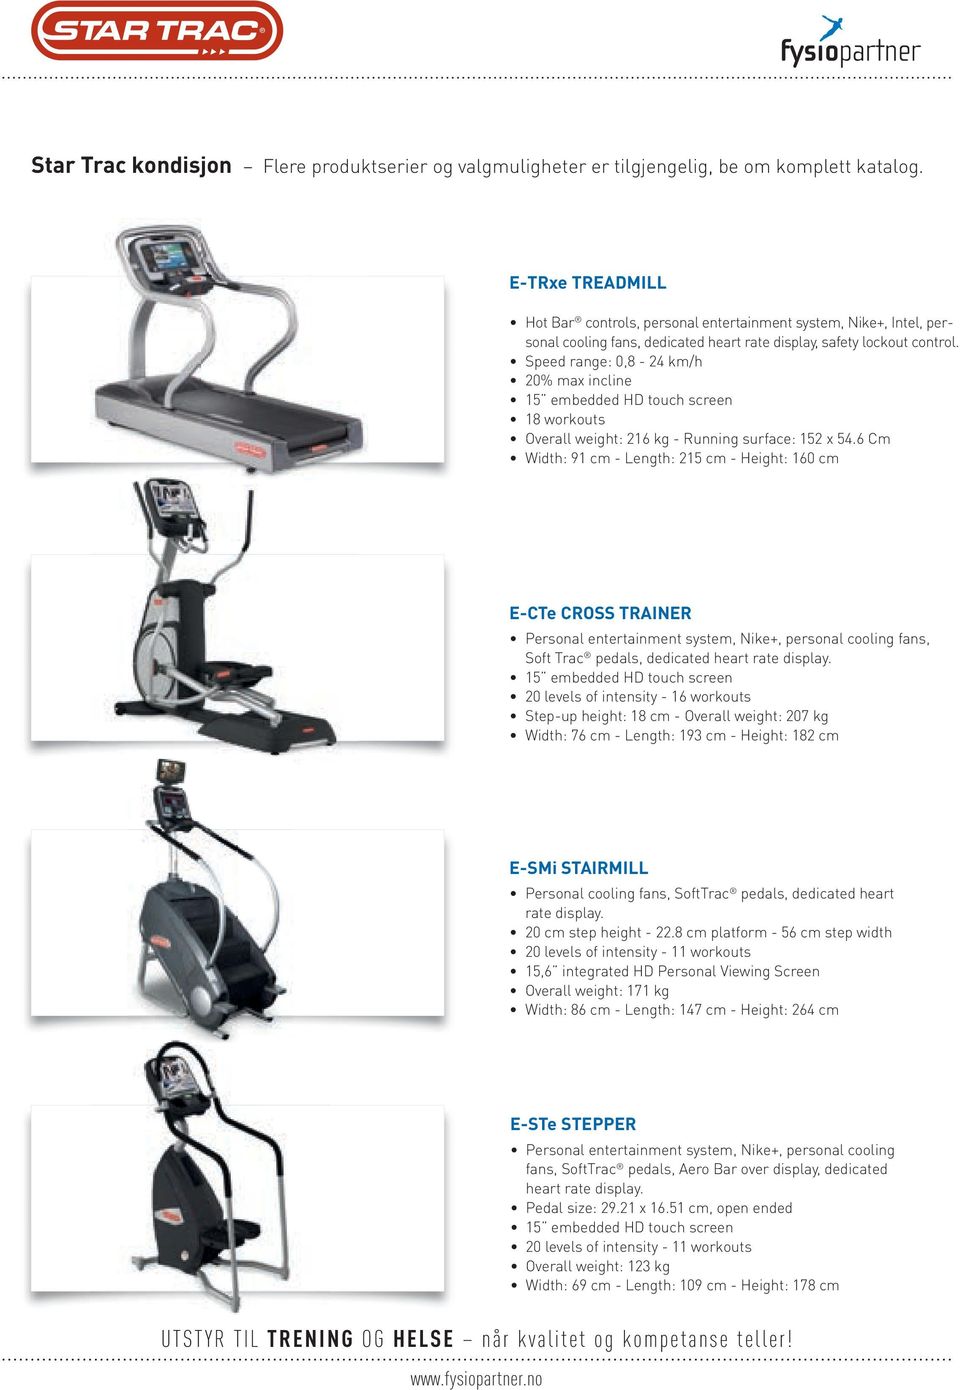 Speed range: 0,8-24 km/h 20% max incline 15 embedded HD touch screen 18 workouts Overall weight: 216 kg - Running surface: 152 x 54.